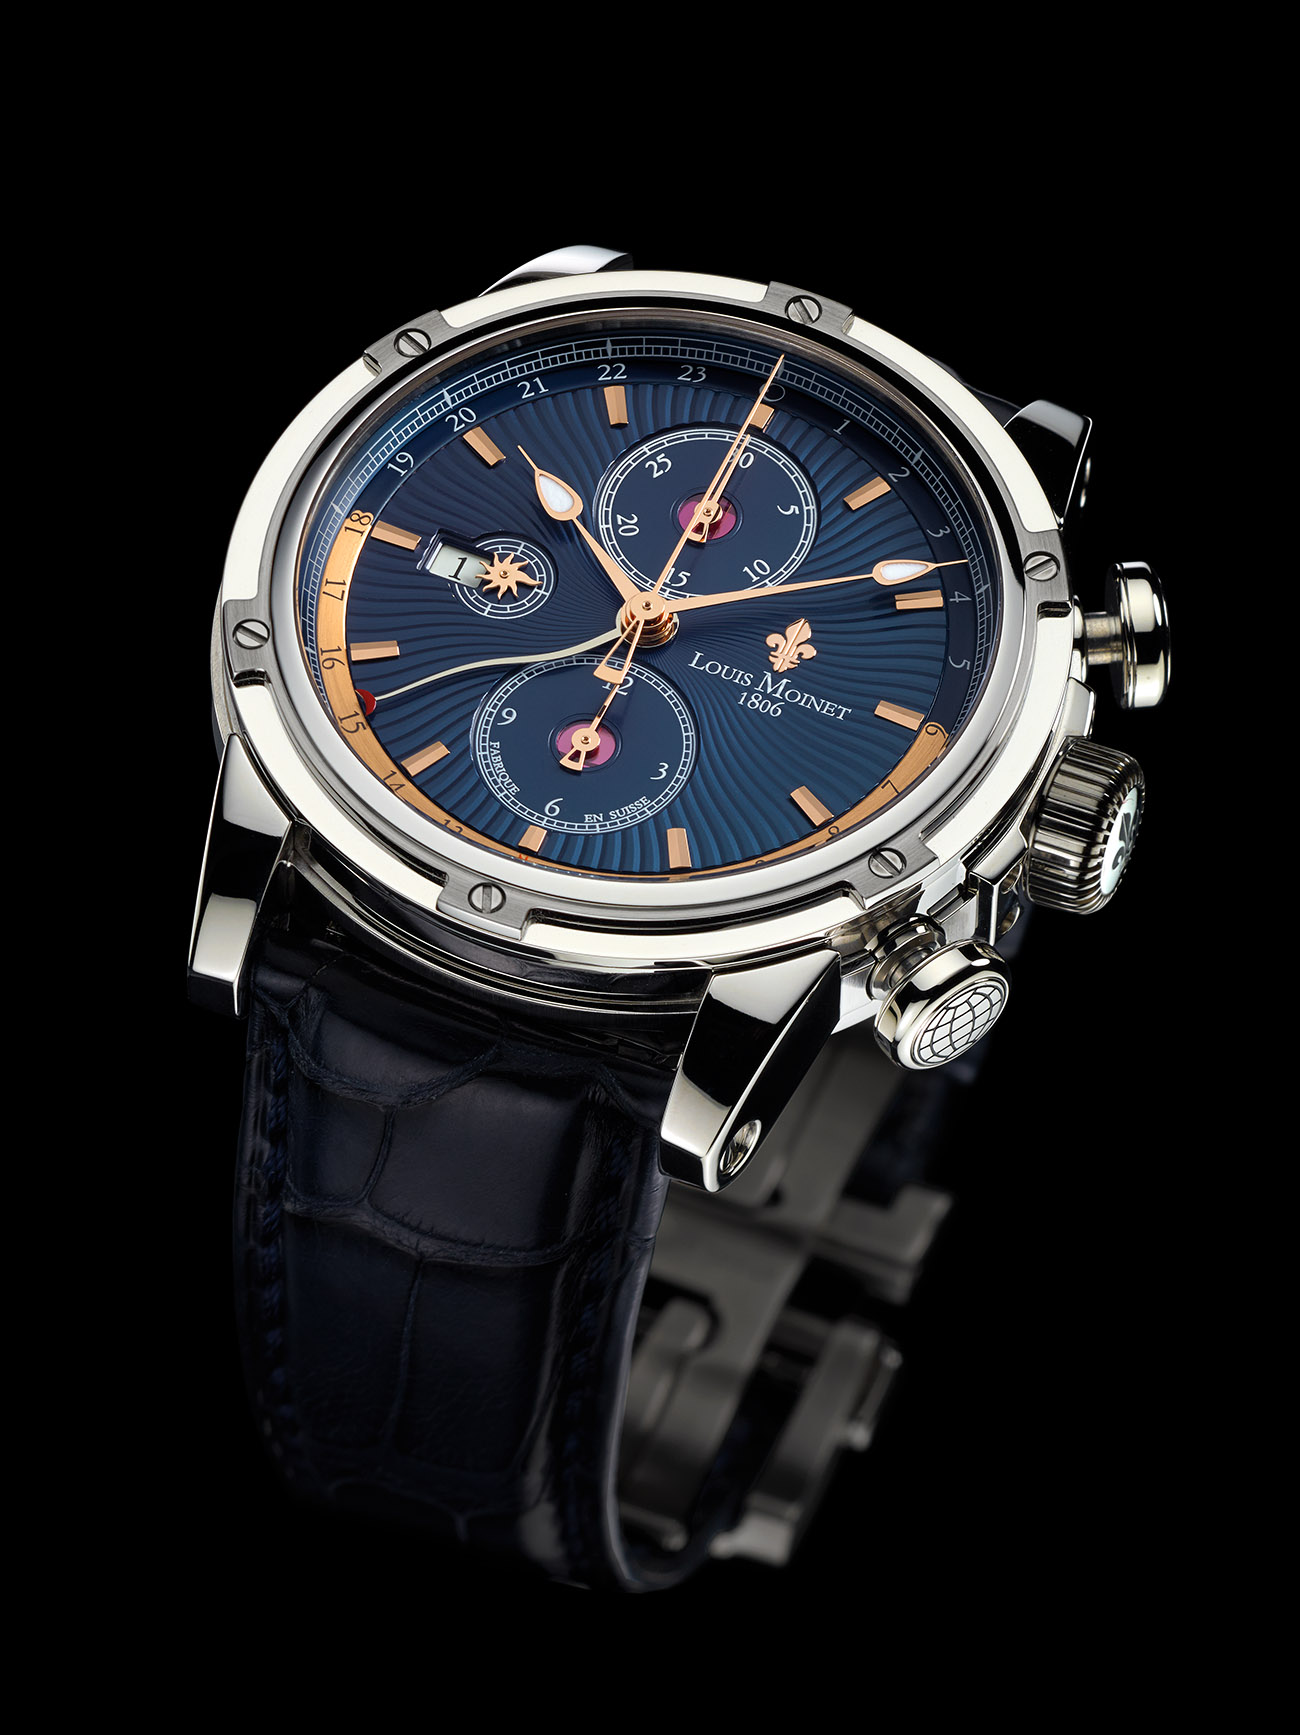 Louis Chronograph Stainless Steel Blue Dial, Ref. LM.24.10.25